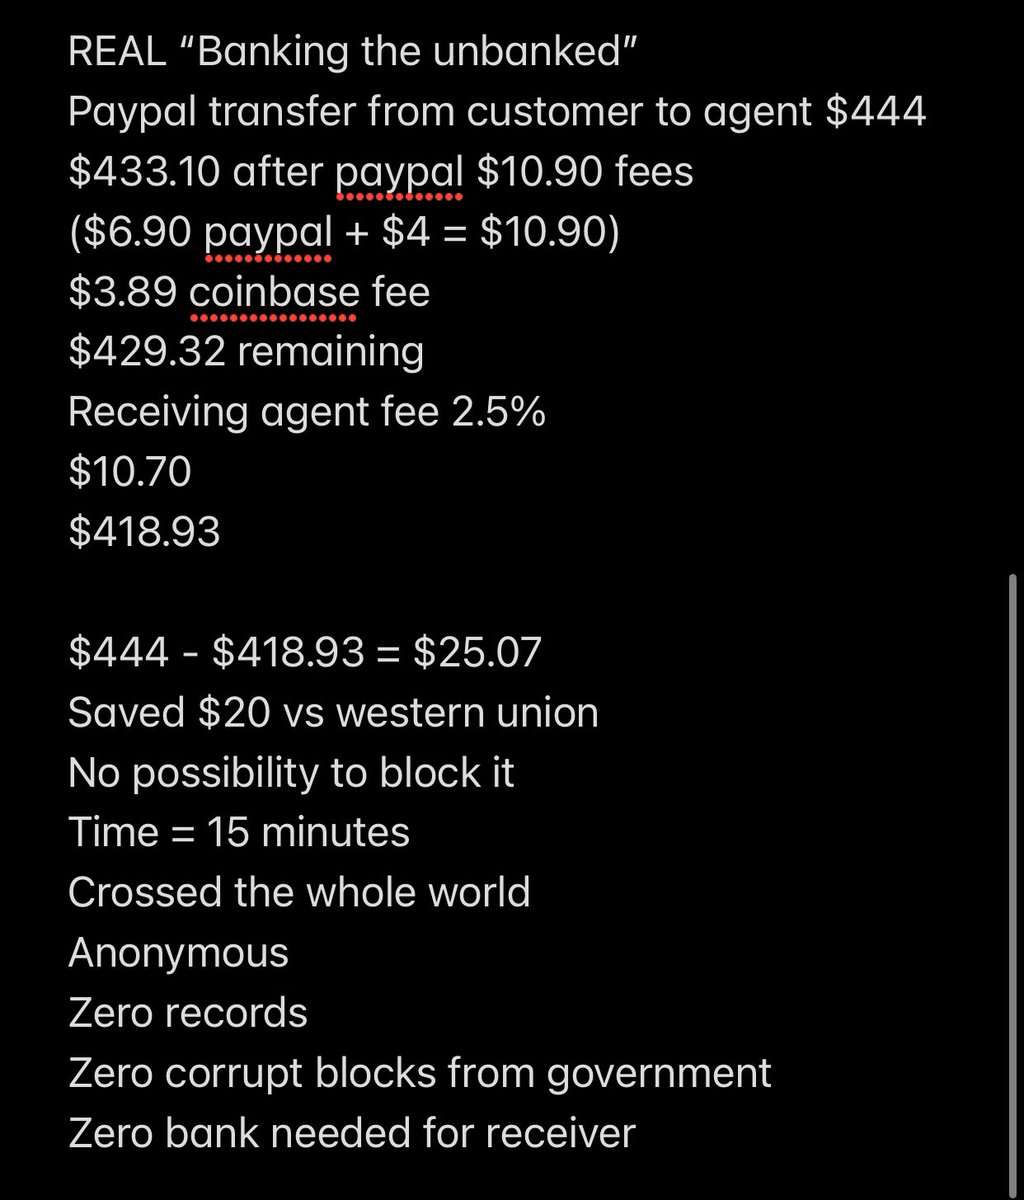 We just did another #BankingTheUnbanked transaction
(We are the #unbanked) Living it.
Saved $20 vs western union
Saved $45-55 vs banks
Saved 3% currency spread ripoff fees = $13+
Took 15 minutes to get our cash on exact opposite side of the world
Support #Blockchain vs CorruptSEC